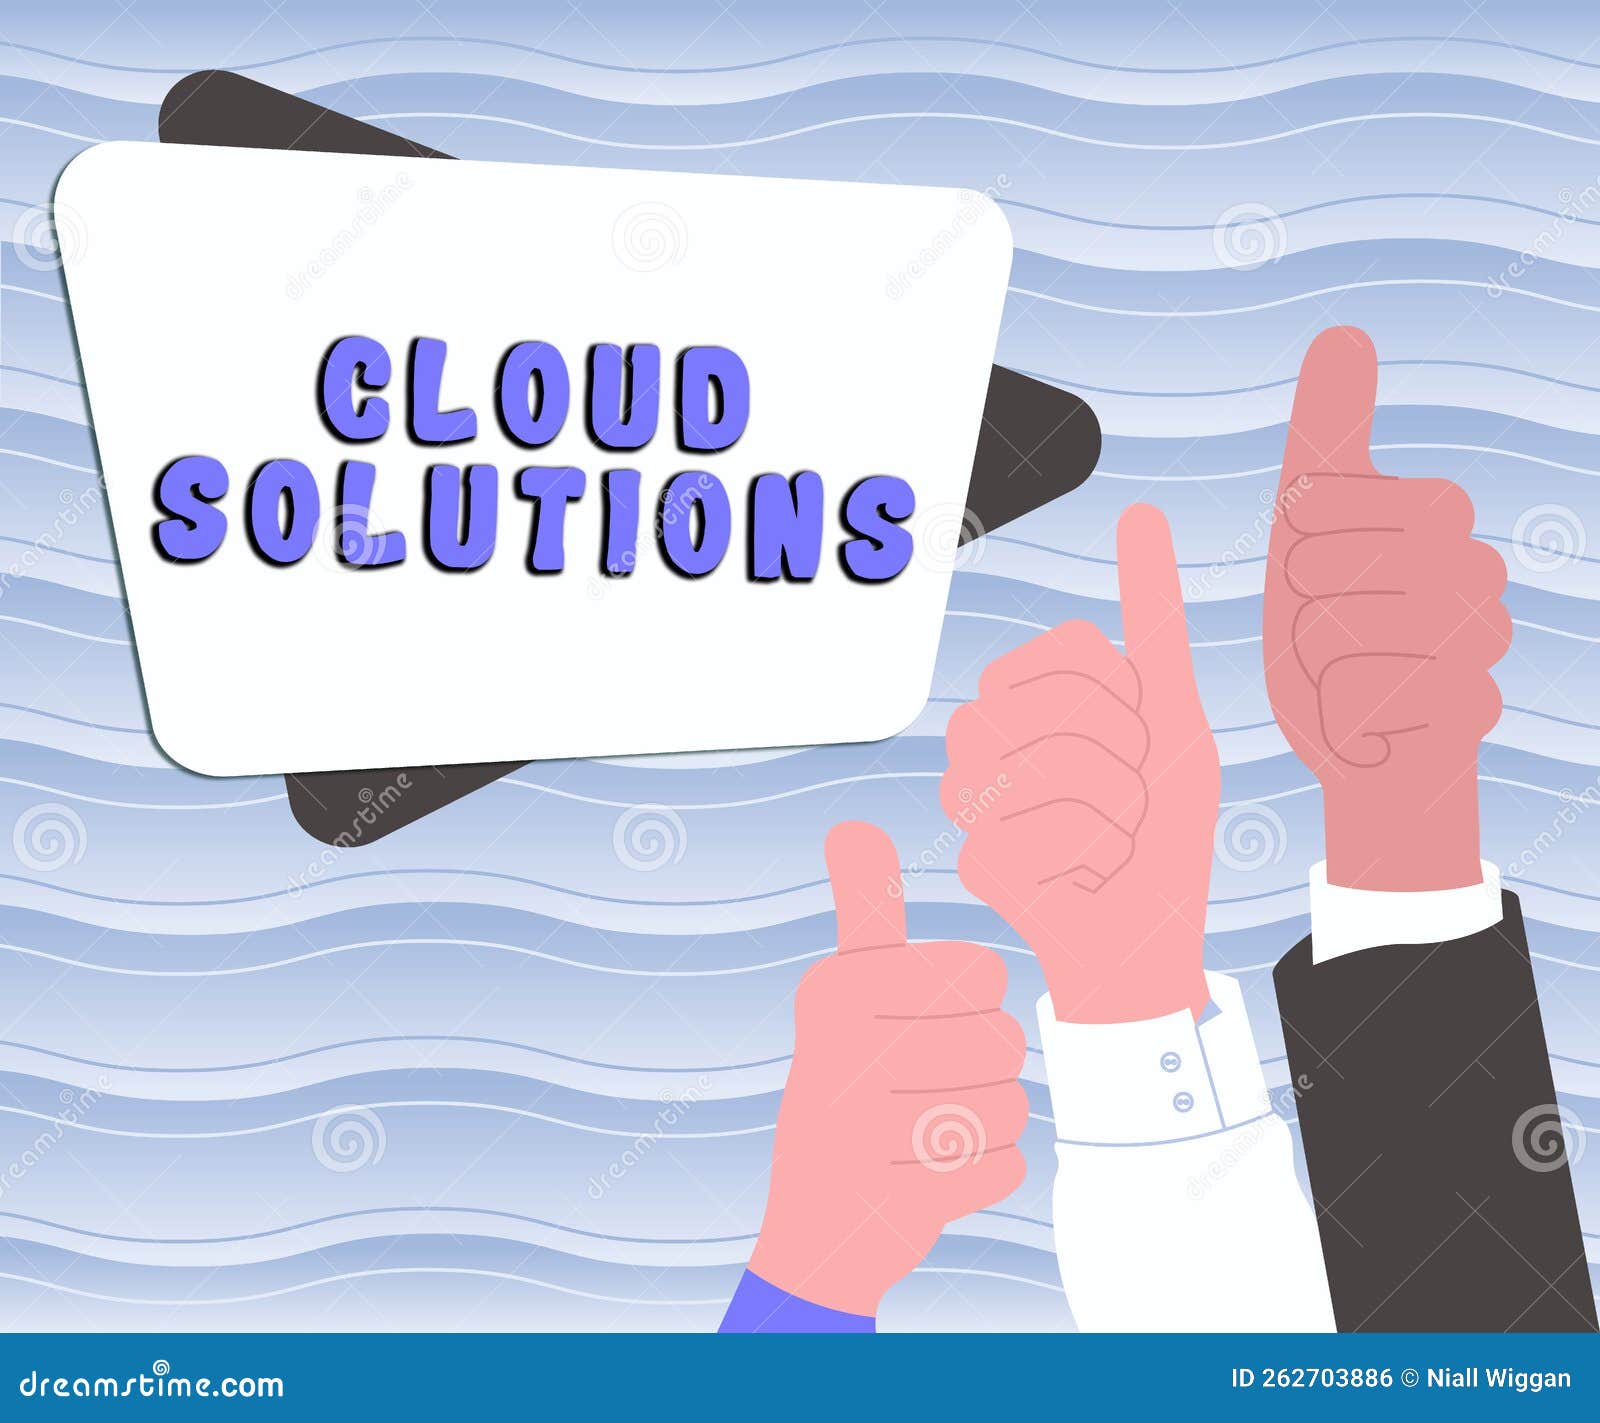 text caption presenting cloud solutions. business showcase ondemand services or resources accessed via the internet